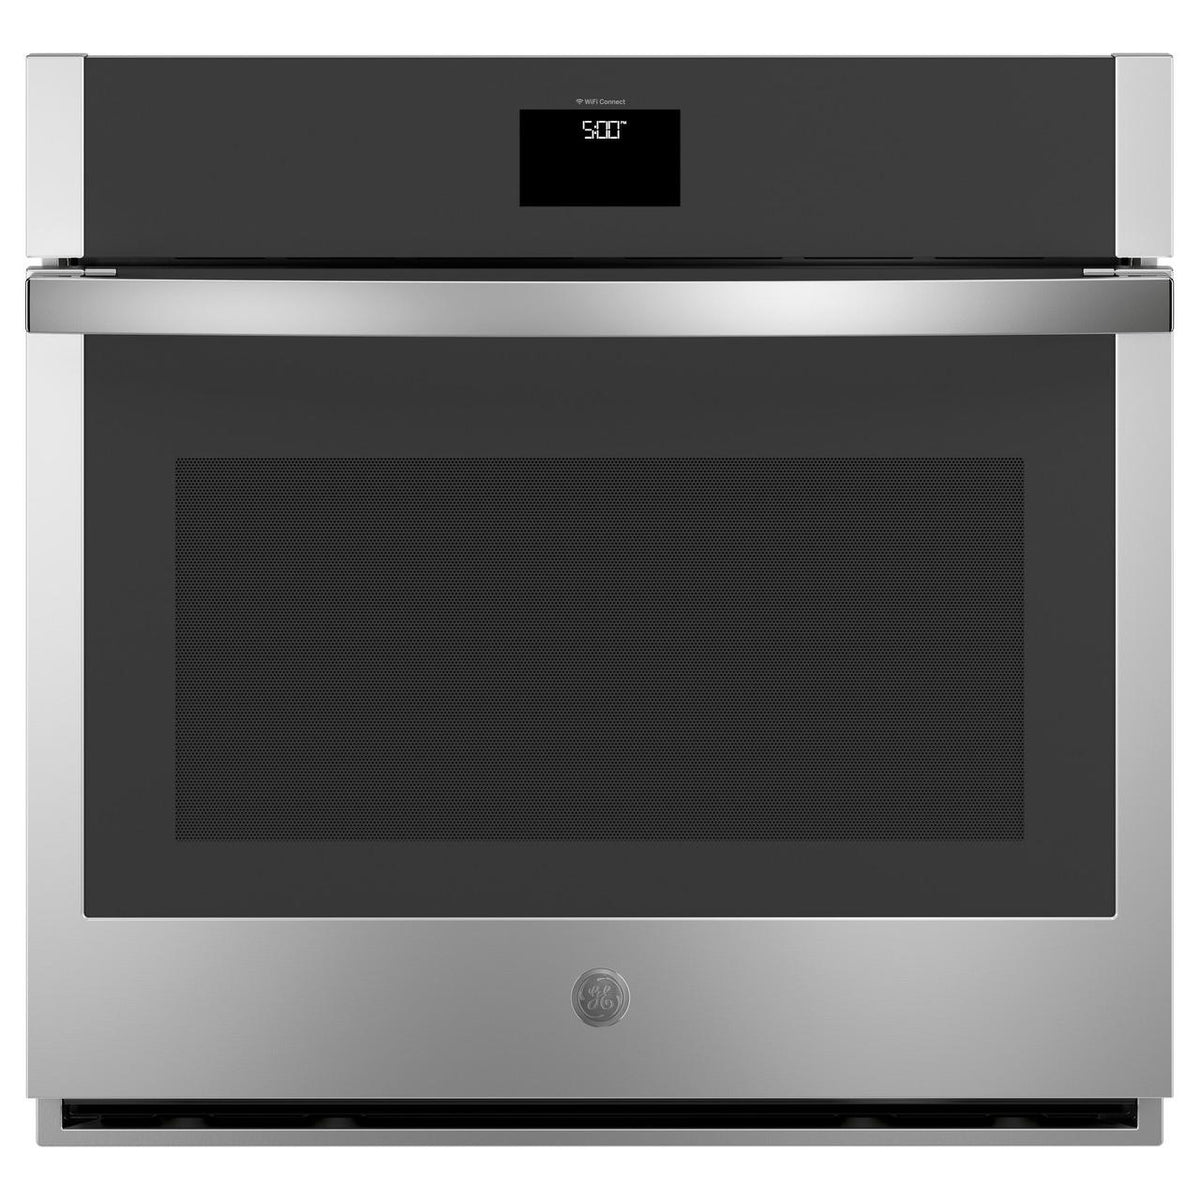 30-inch, 5.0 cu. ft. built-in Single Wall Oven with True European Convection JTS5000SVSS IMAGE 1